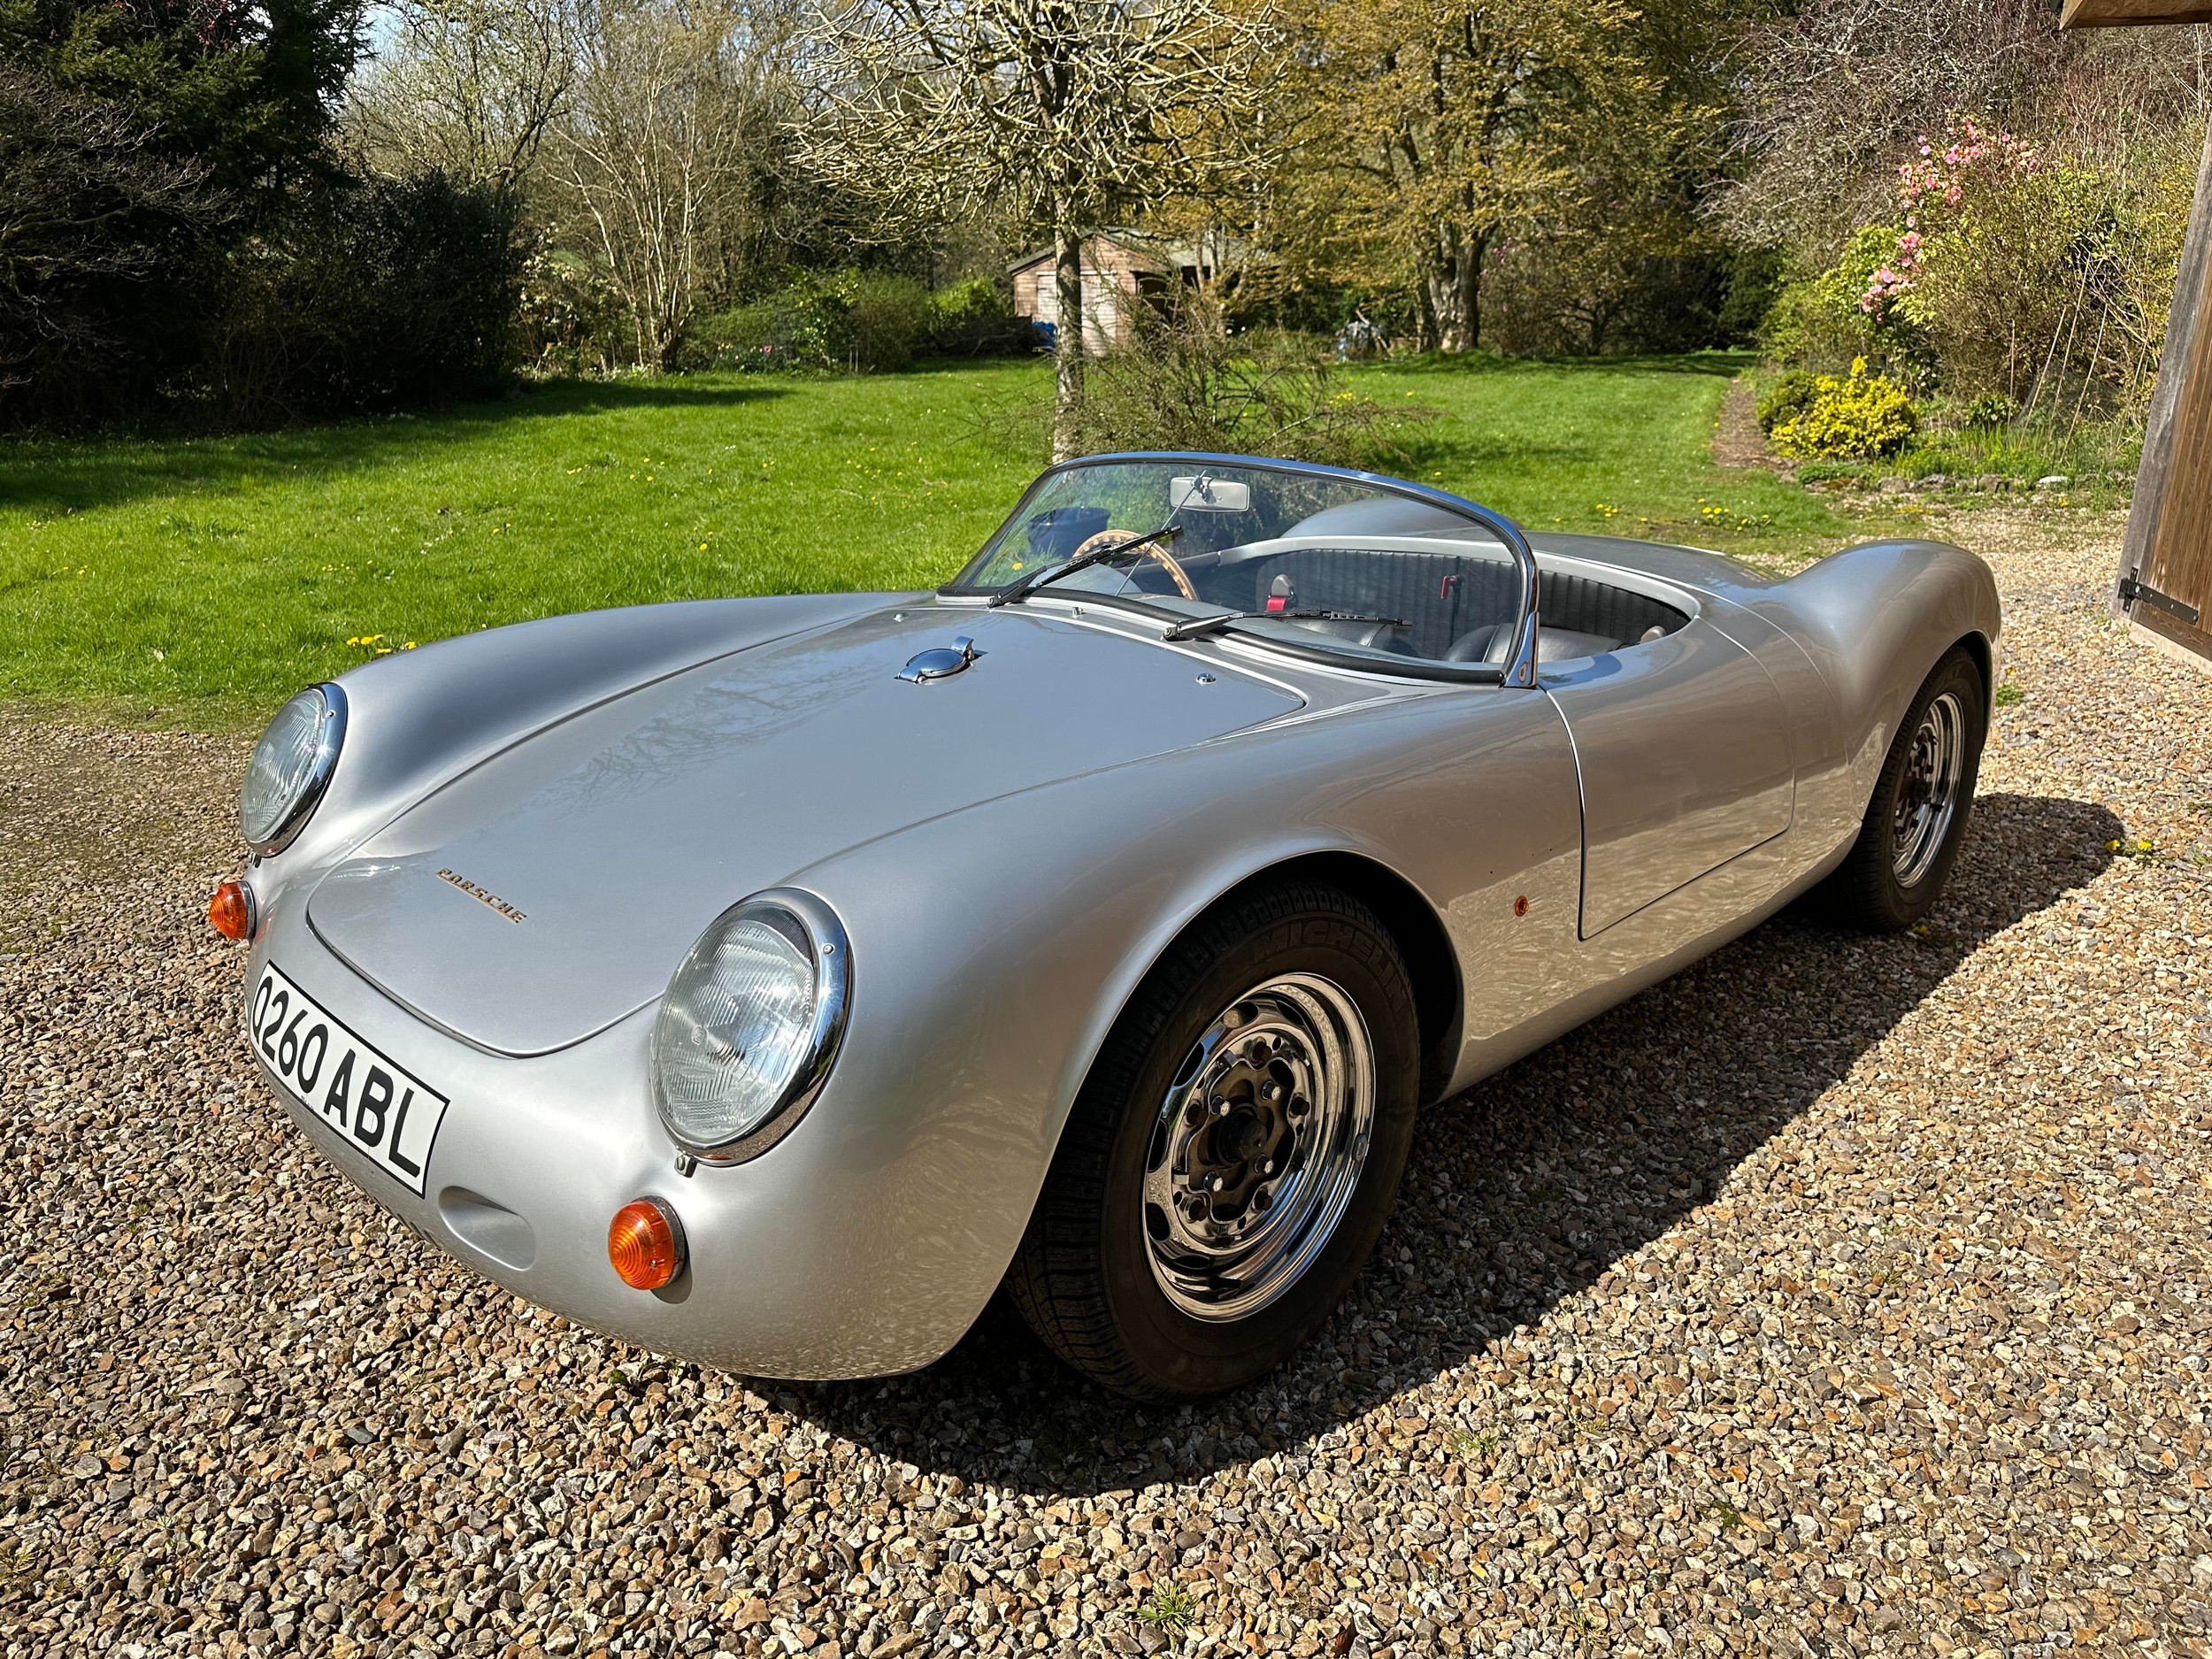 1996 TRAC Technic Porsche 550 Spyder Replica Registration Number Q260 ABL Metallic silver with a - Image 8 of 65